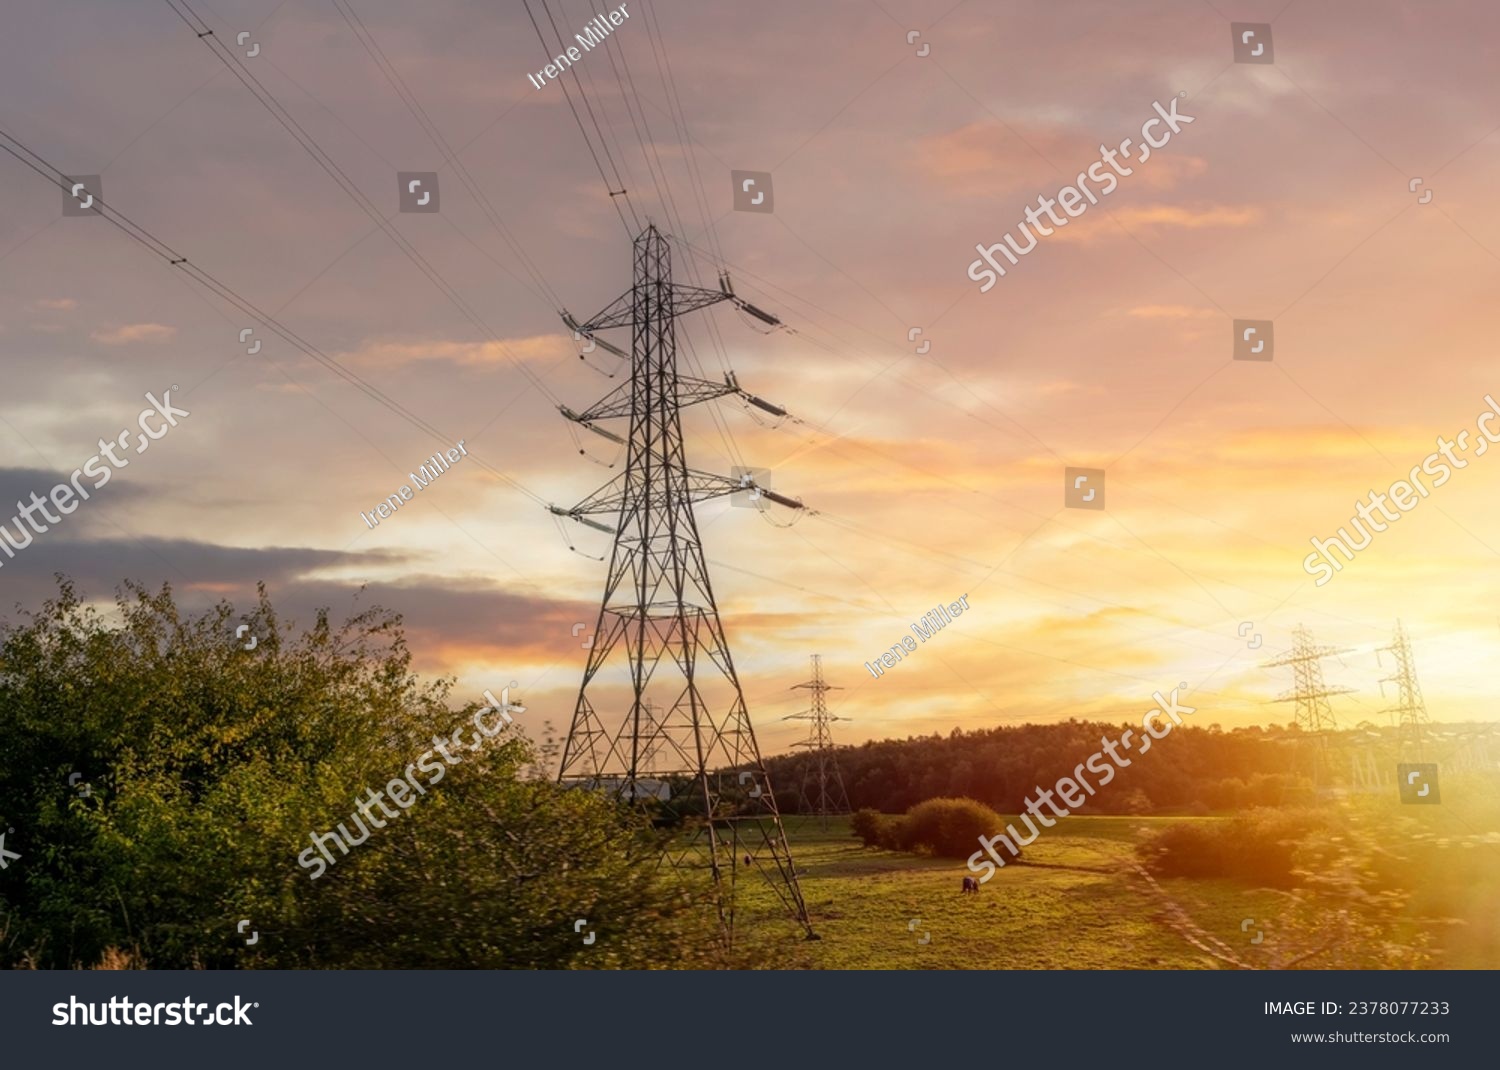 High voltage electric tower line pylon for distribution of electricity from powerstations to customers through national power grid #2378077233